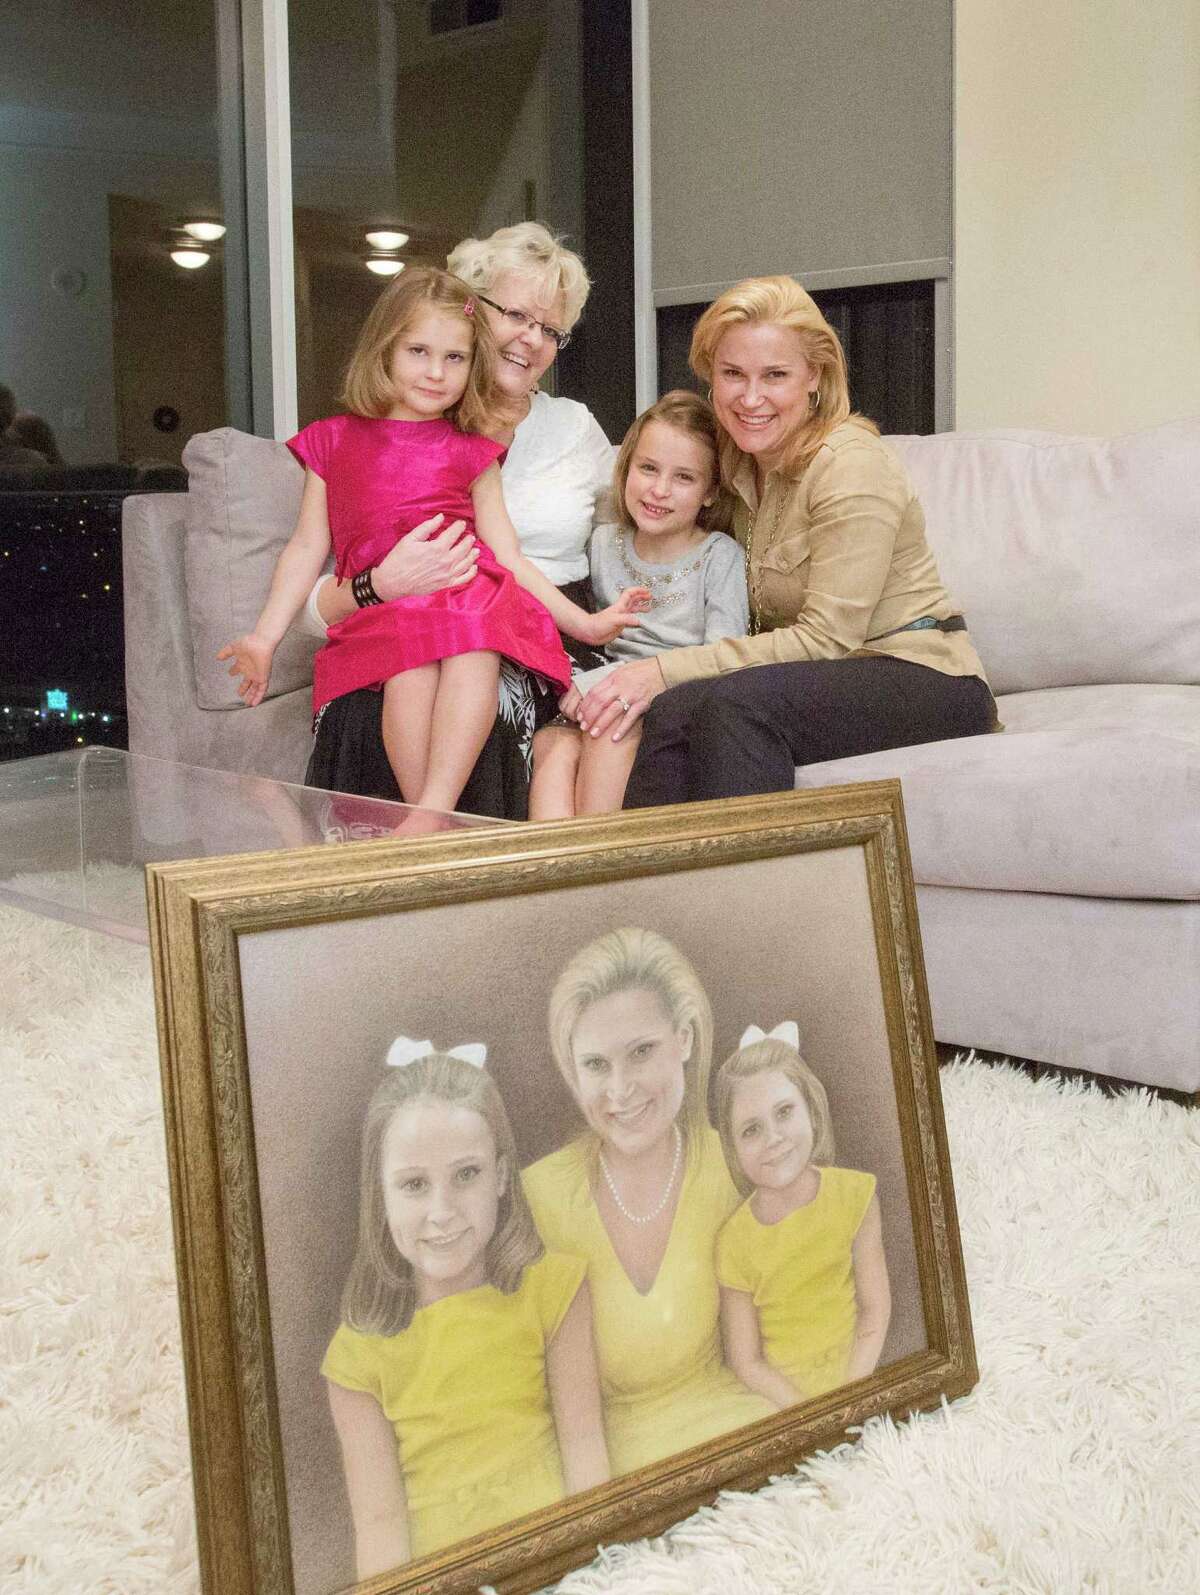 From left, Catherine Cruz, 4, Betty Odgaard, Caroline Cruz, 7, and Heidi Cruz, pose for a photo at a private residence Thursday, Oct. 22, 2015, in Houston. Odgaard, who was sued with her husband Richard for refusing to do same-sex marriages in their Grimes, Iowa gallery, drove from Dallas with her husband to give a pencil drawing to Cruz featuring her and her two daughters. ( Jon Shapley / Houston Chronicle )